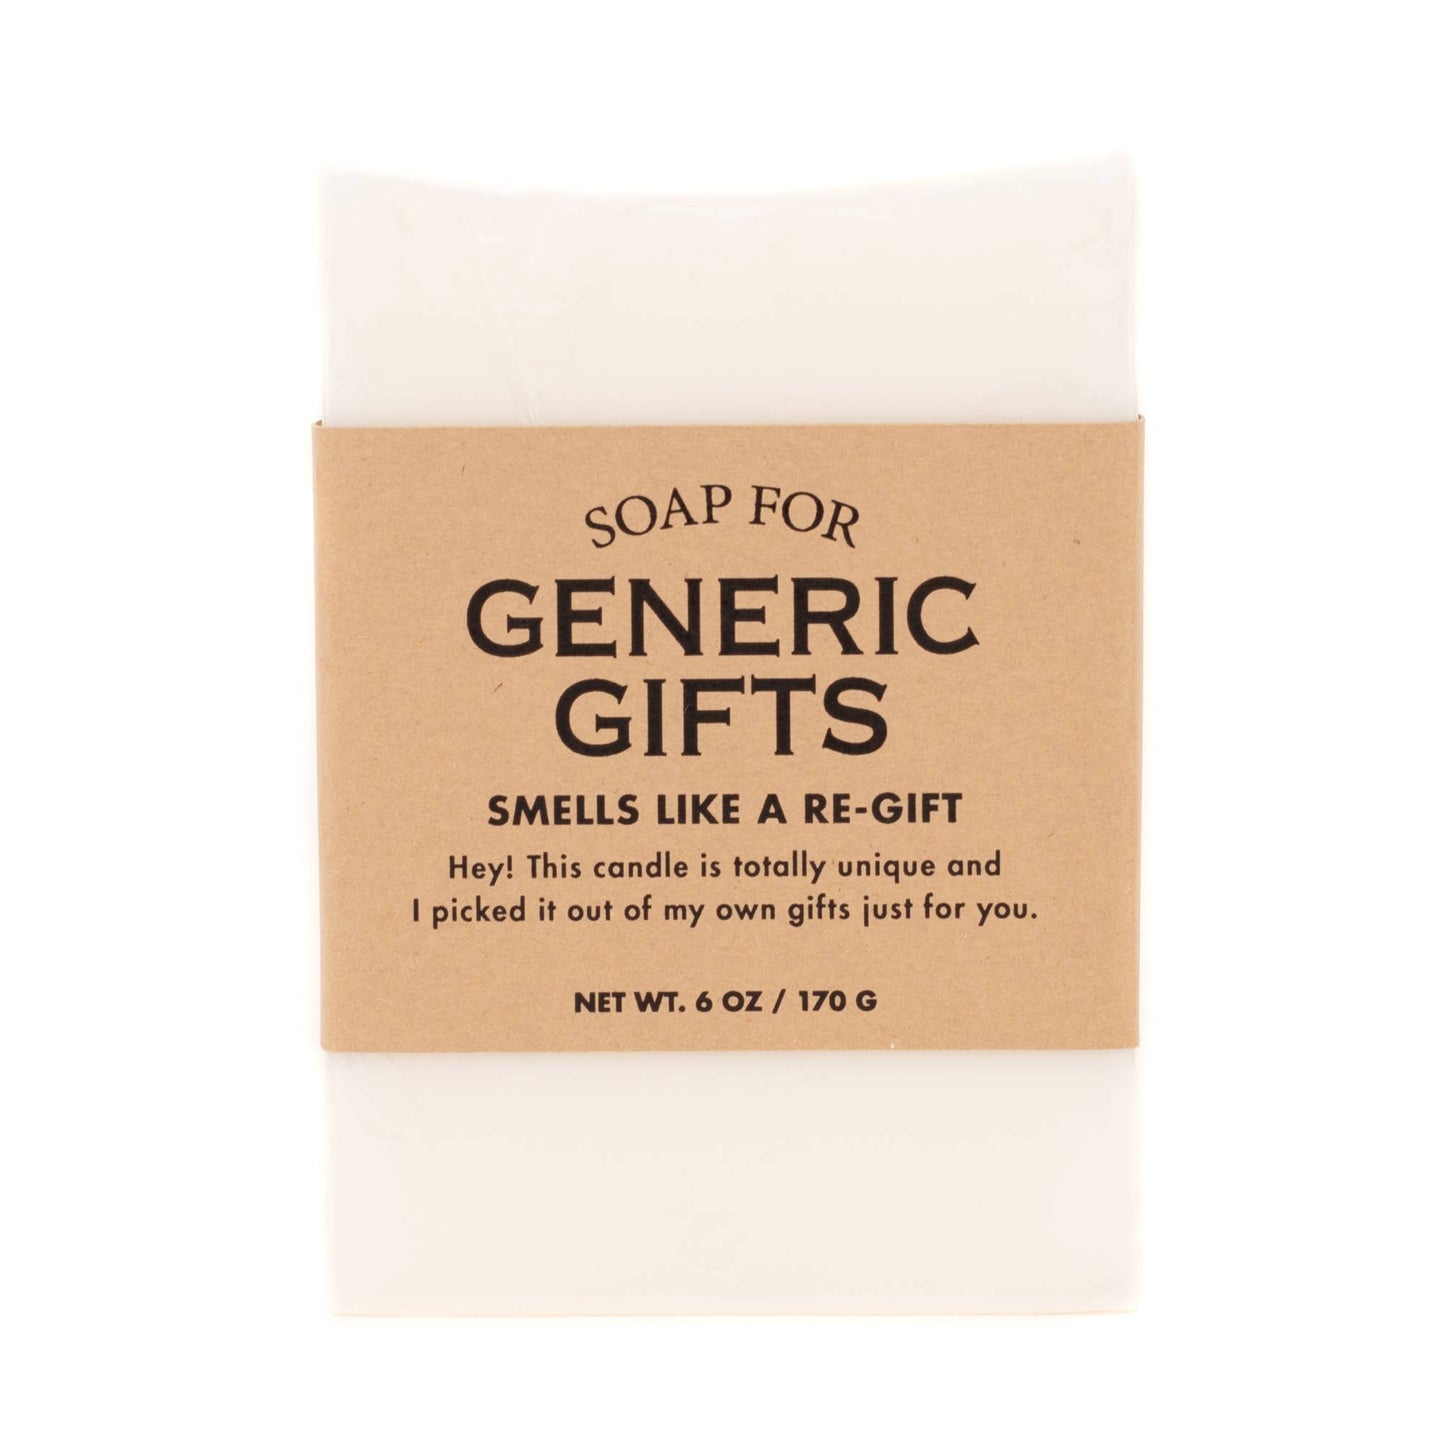 A Soap for Generic Gifts - HOLIDAY | Funny Christmas Soap